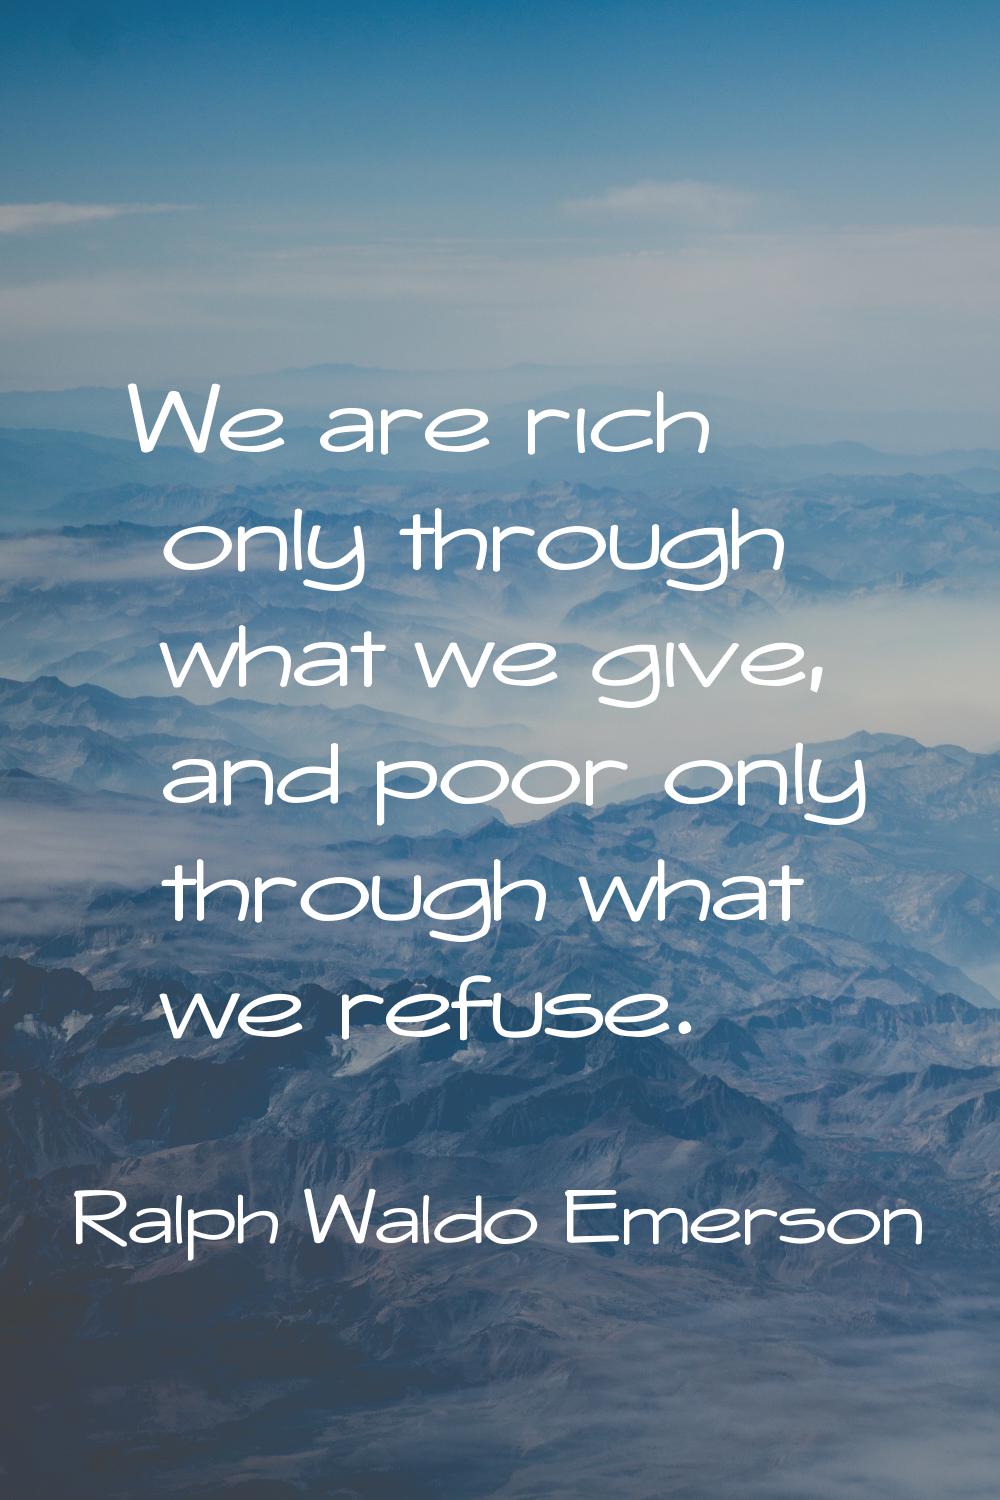 We are rich only through what we give, and poor only through what we refuse.